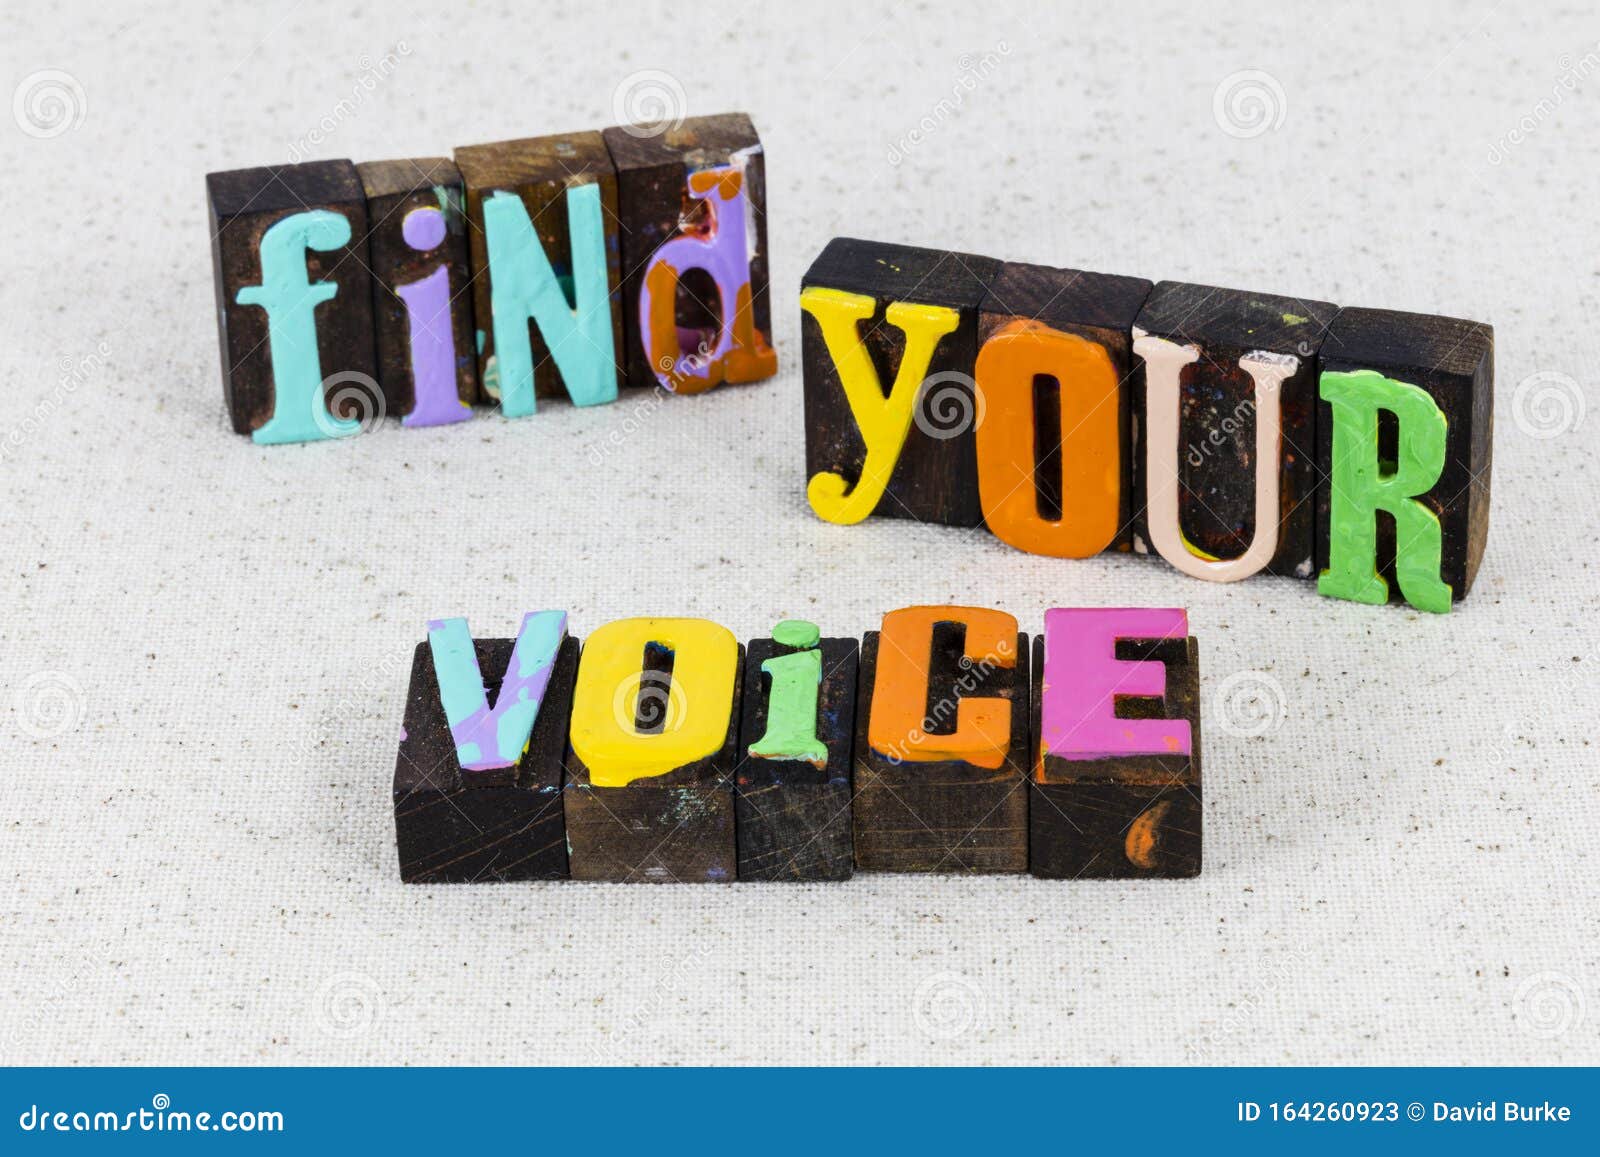 find your voice share music speak up communication leadership